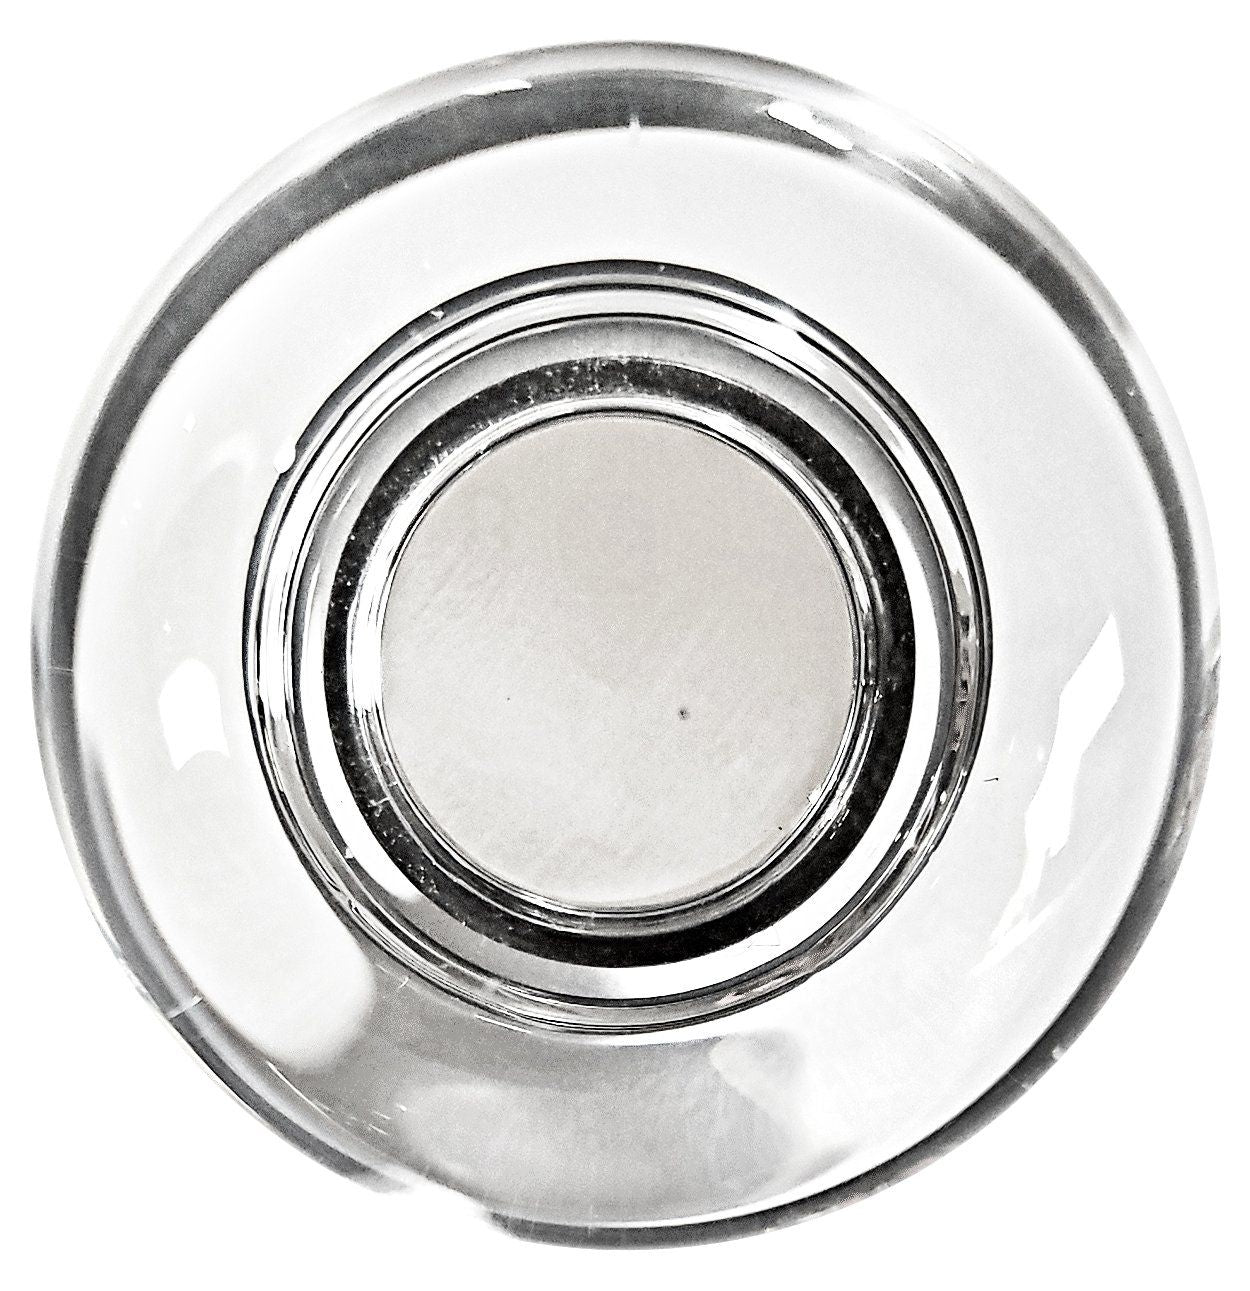 1 1/4 Inch Flat-Faced Round Crystal Clear Glass Cabinet & Furniture Knob